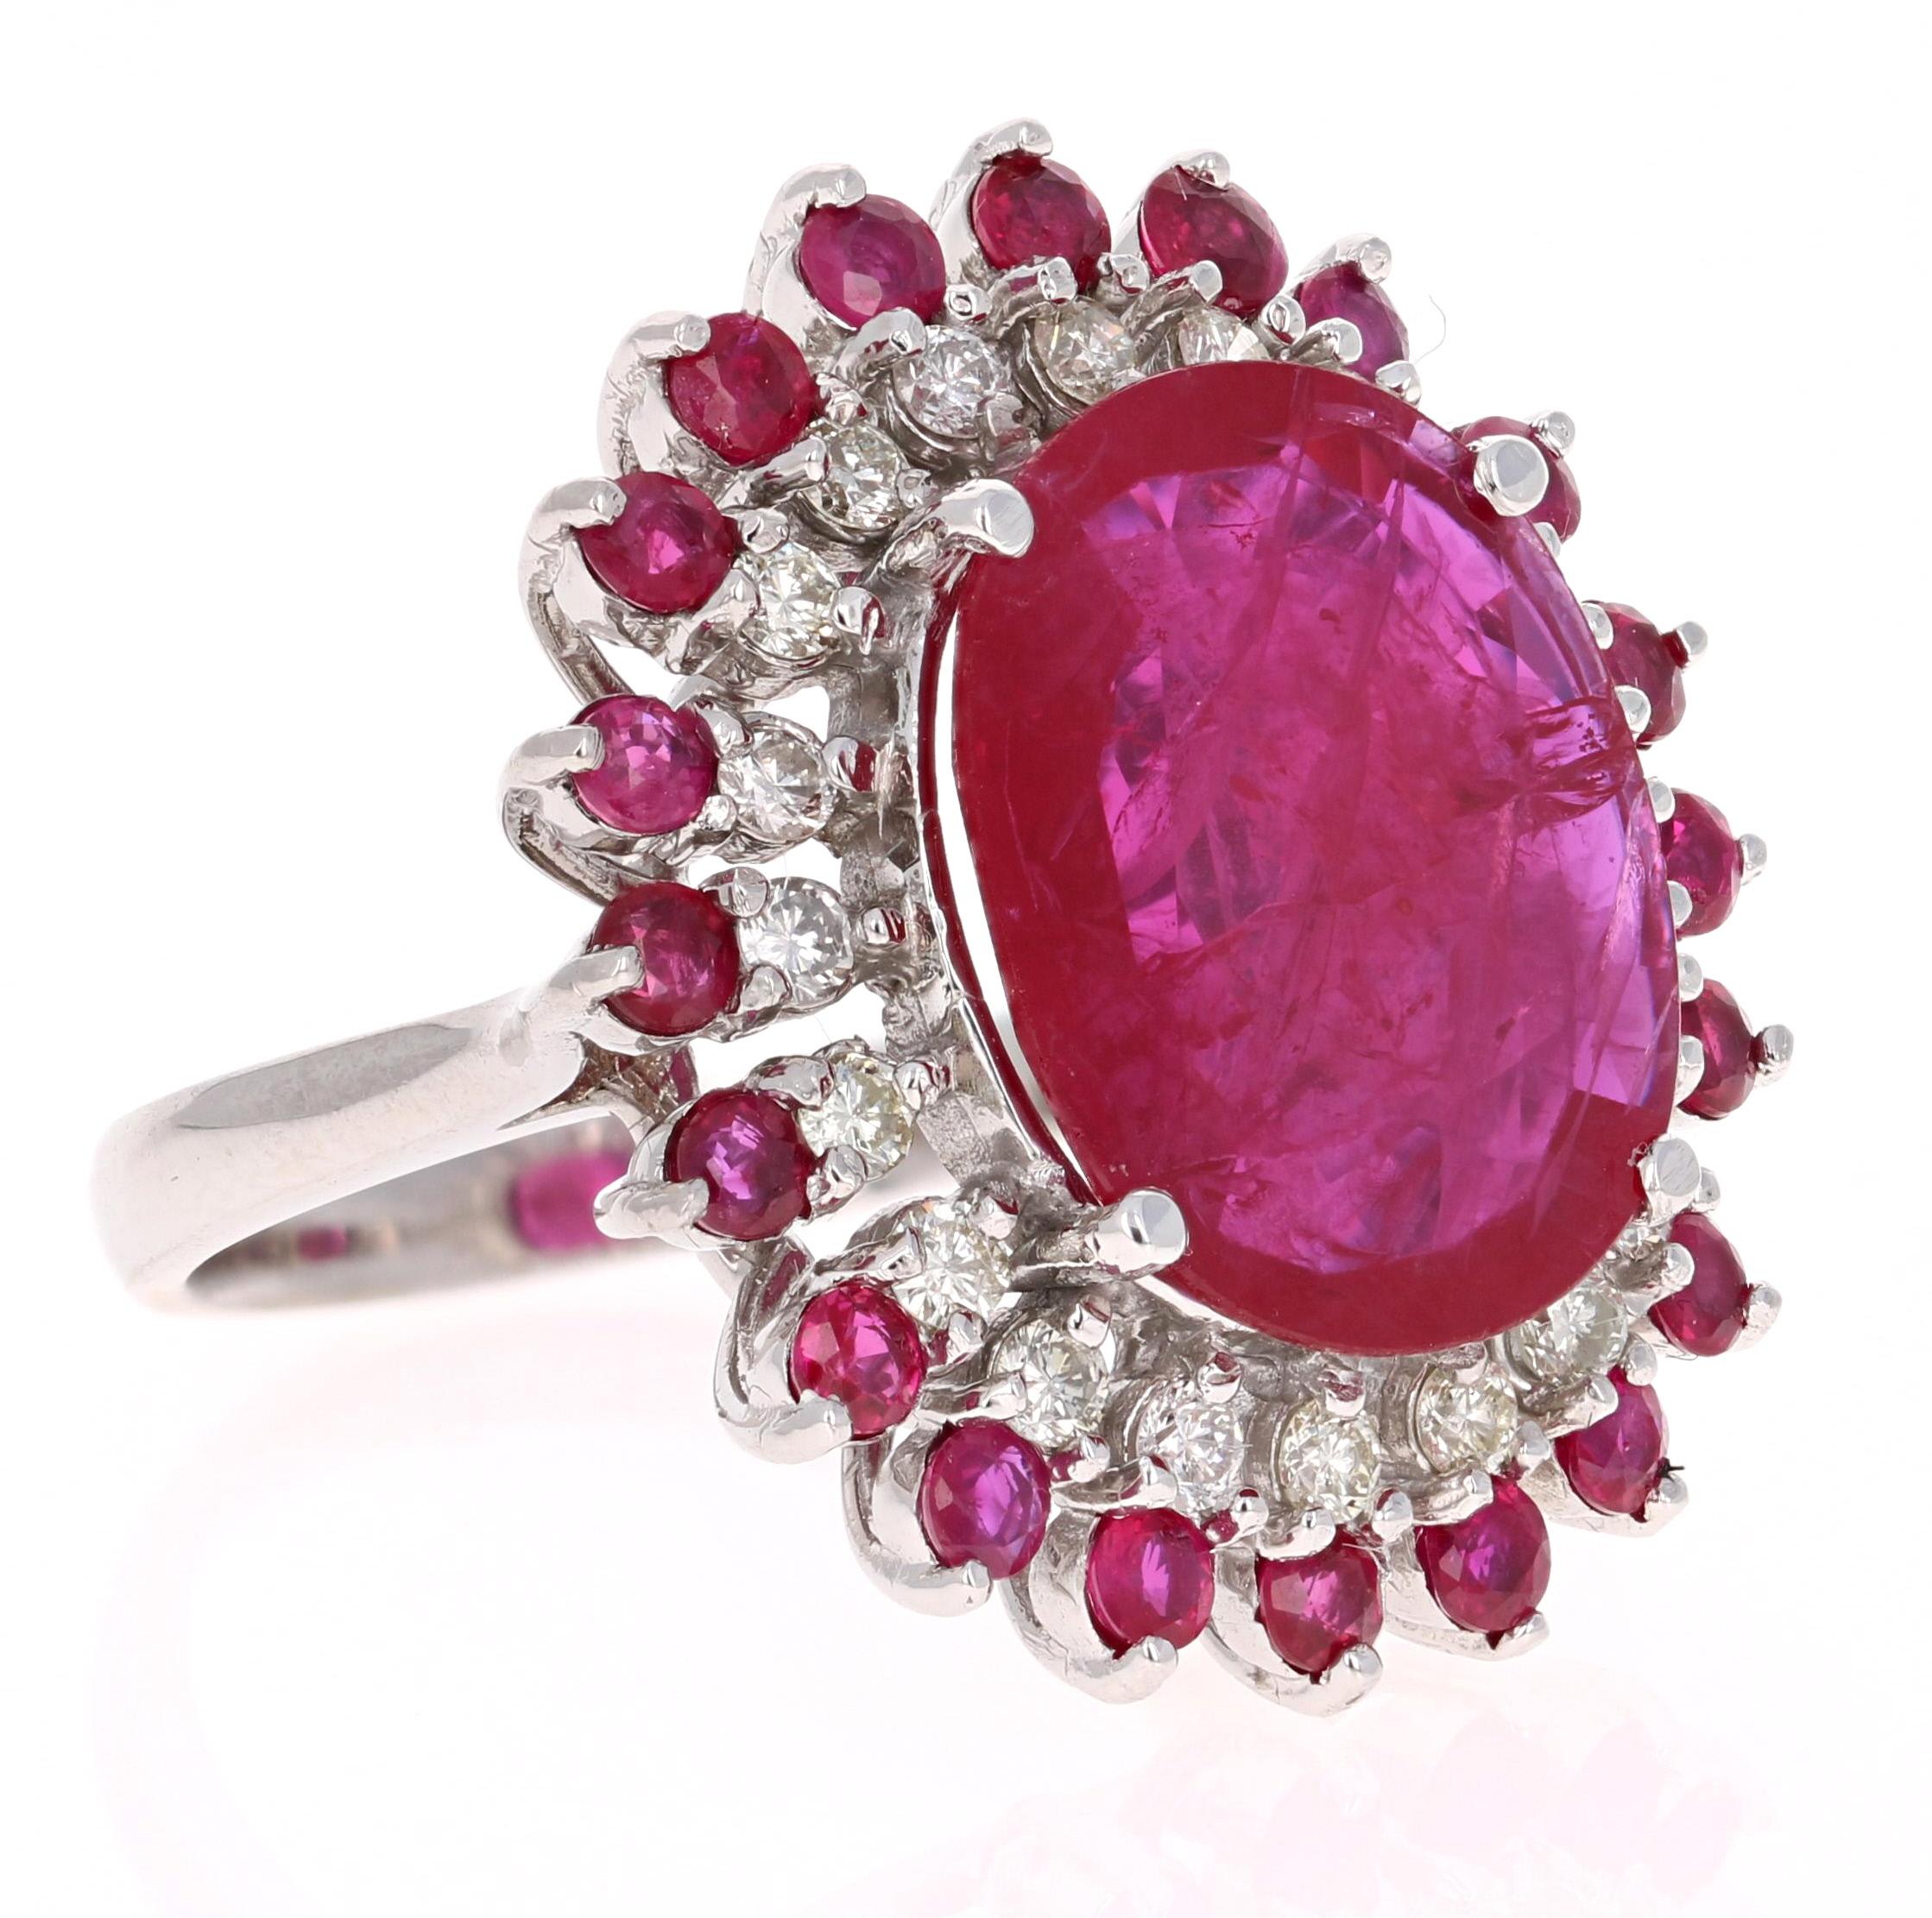 A real statement piece - 13.68 Carat Ruby and Diamond Cocktail Ring in 14K White Gold!
This ring has a gorgeous and large 11.47 Carat Oval Cut Ruby set in the center that measures at 17 mm x 14 mm and is surrounded by a row of 20 Round Cut Diamonds